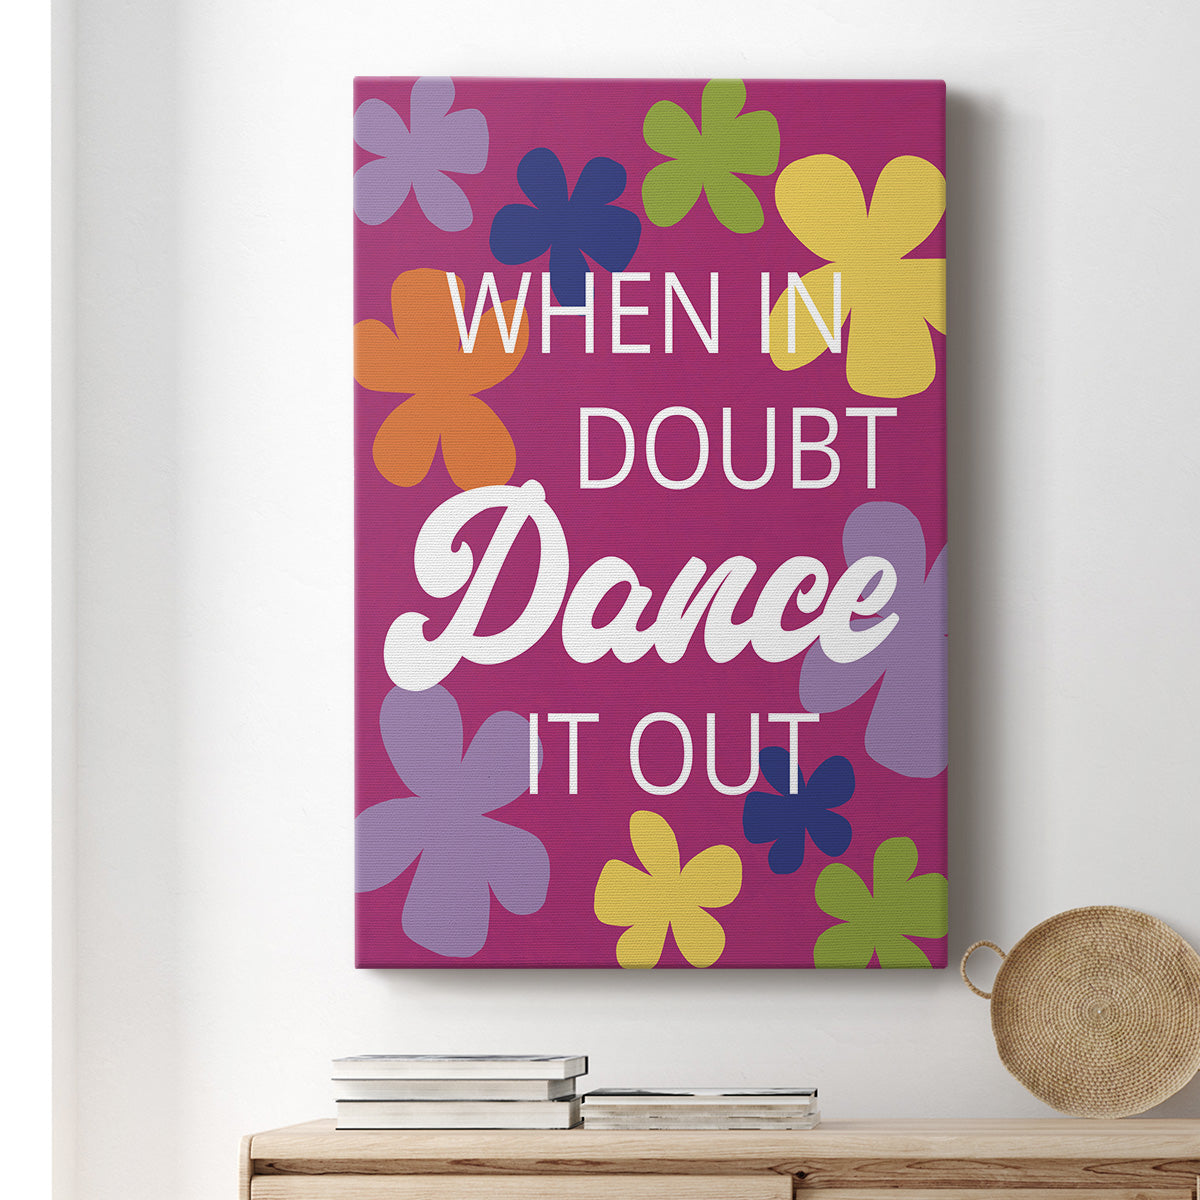 Dance It Out Premium Gallery Wrapped Canvas - Ready to Hang